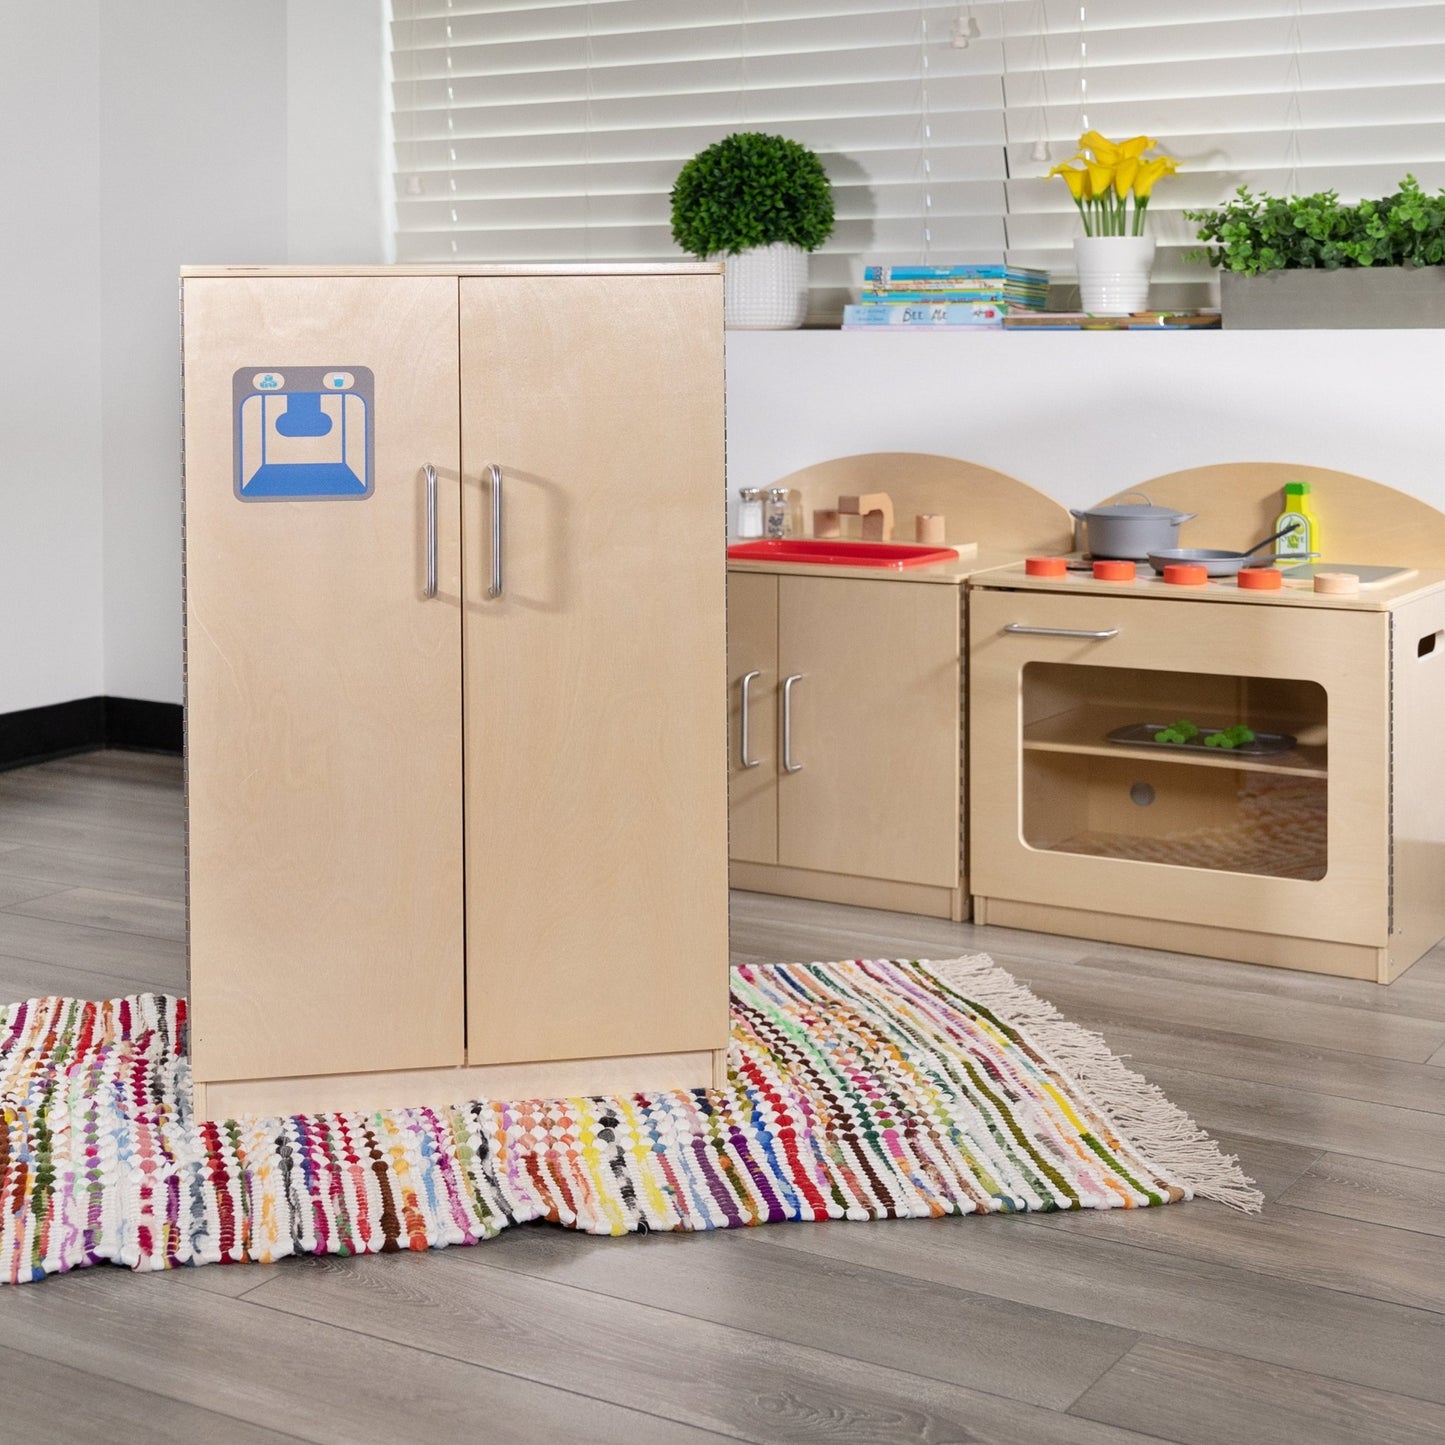 Hercules Children's Wooden Kitchen Refrigerator for Commercial or Home Use - Safe, Kid Friendly Design - SchoolOutlet